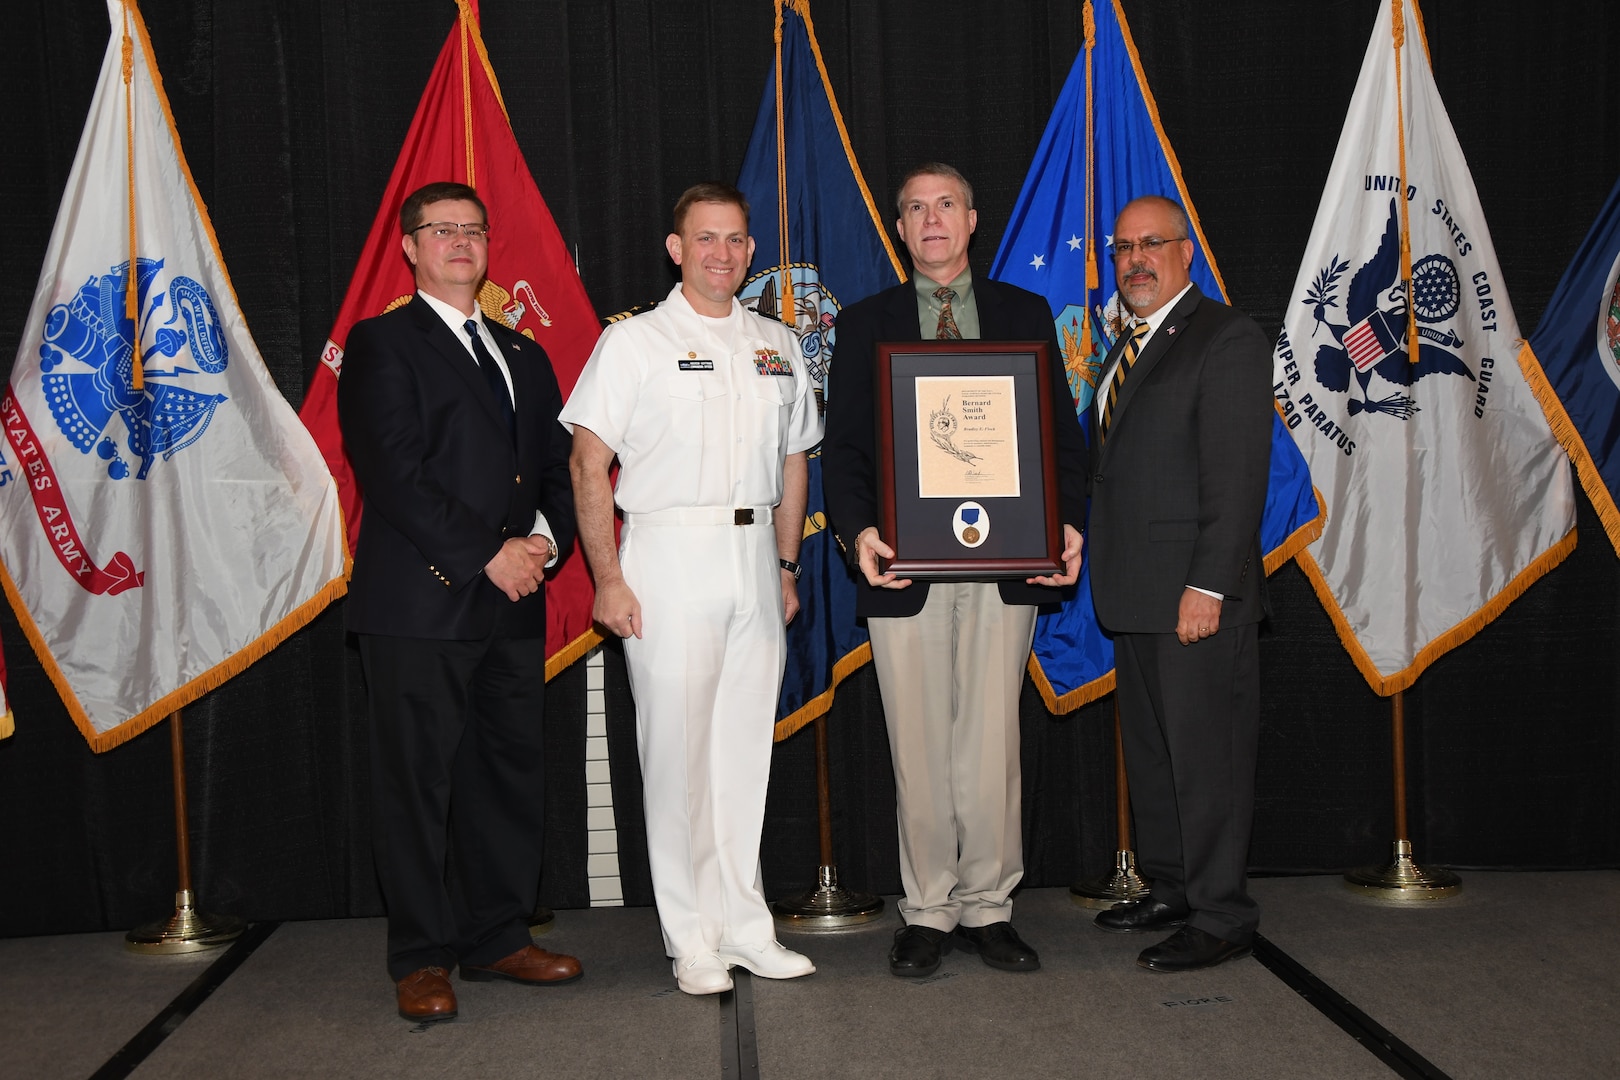 IMAGE: Bradley Flock is presented the Bernard Smith Award at Naval Surface Warfare Center Dahlgren Division's annual awards ceremony, Apr. 26 at the Fredericksburg Expo and Conference Center.